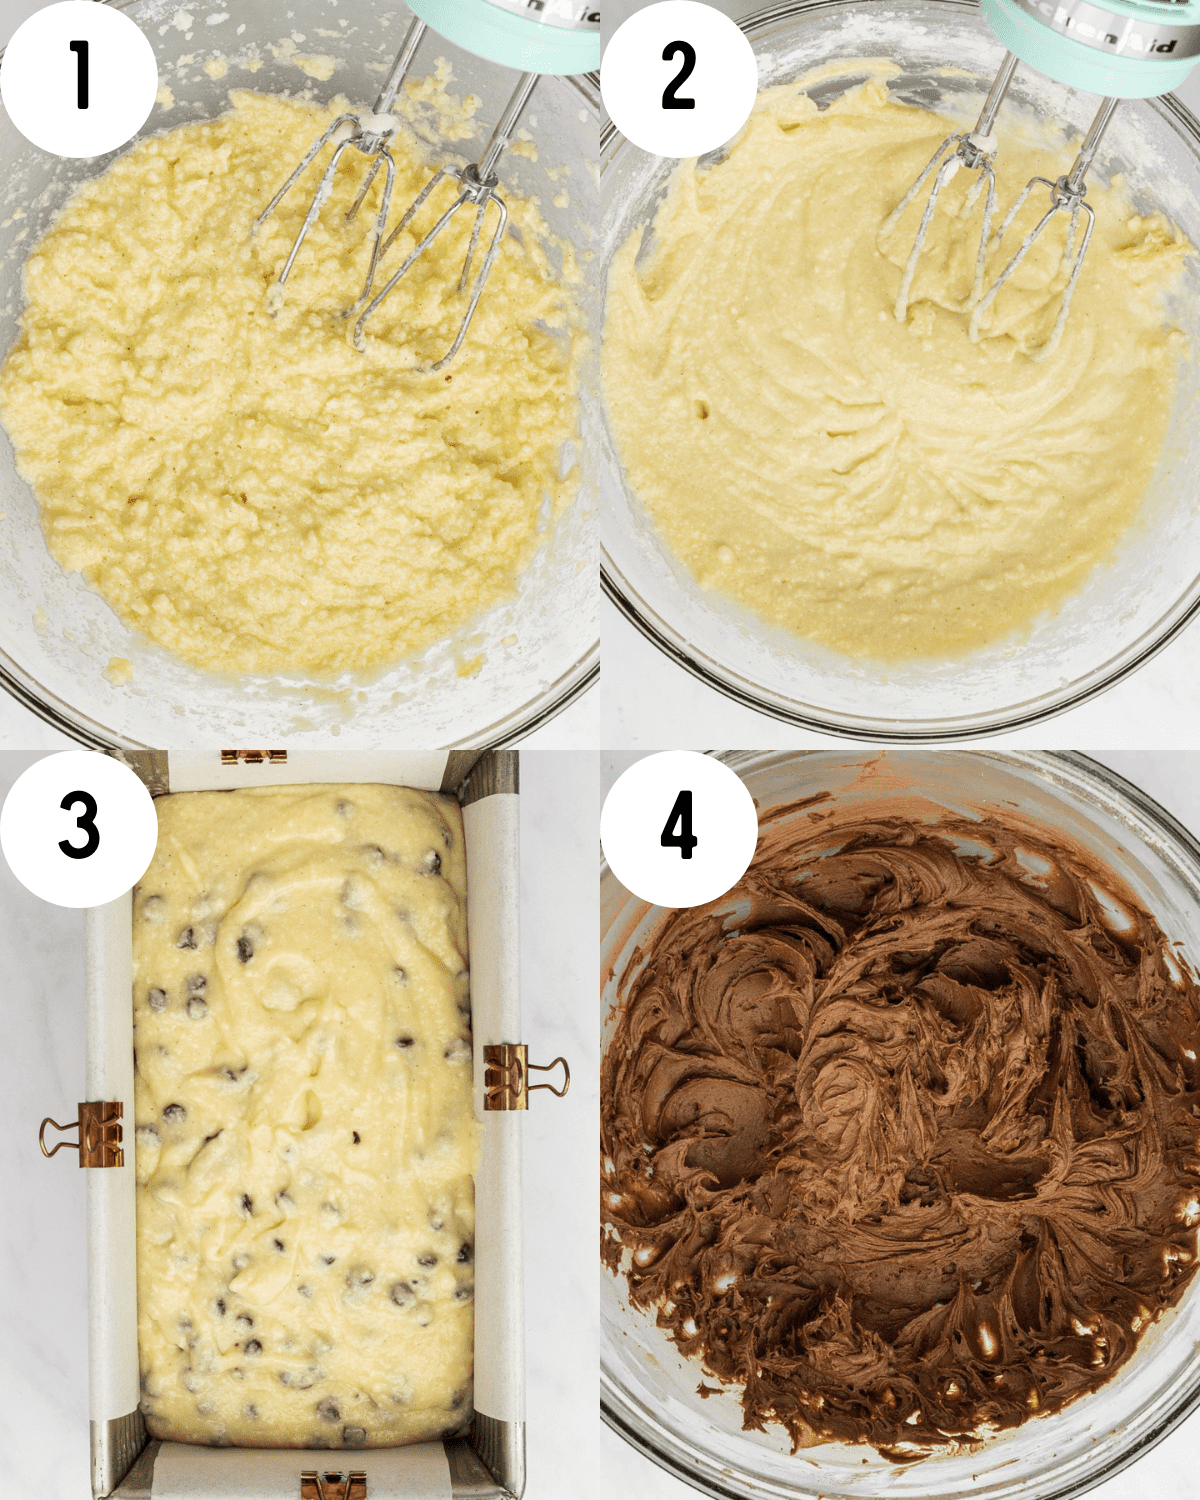 steps to make loaf cake- wet ingredients mixed together in a clear glass bowl. Dry ingredients + milk mixed into clear glass bowl. Chocolate chip loaf cake batter in a loaf paan. Chocolate buttercream whipped together in a clear glass bowl. 